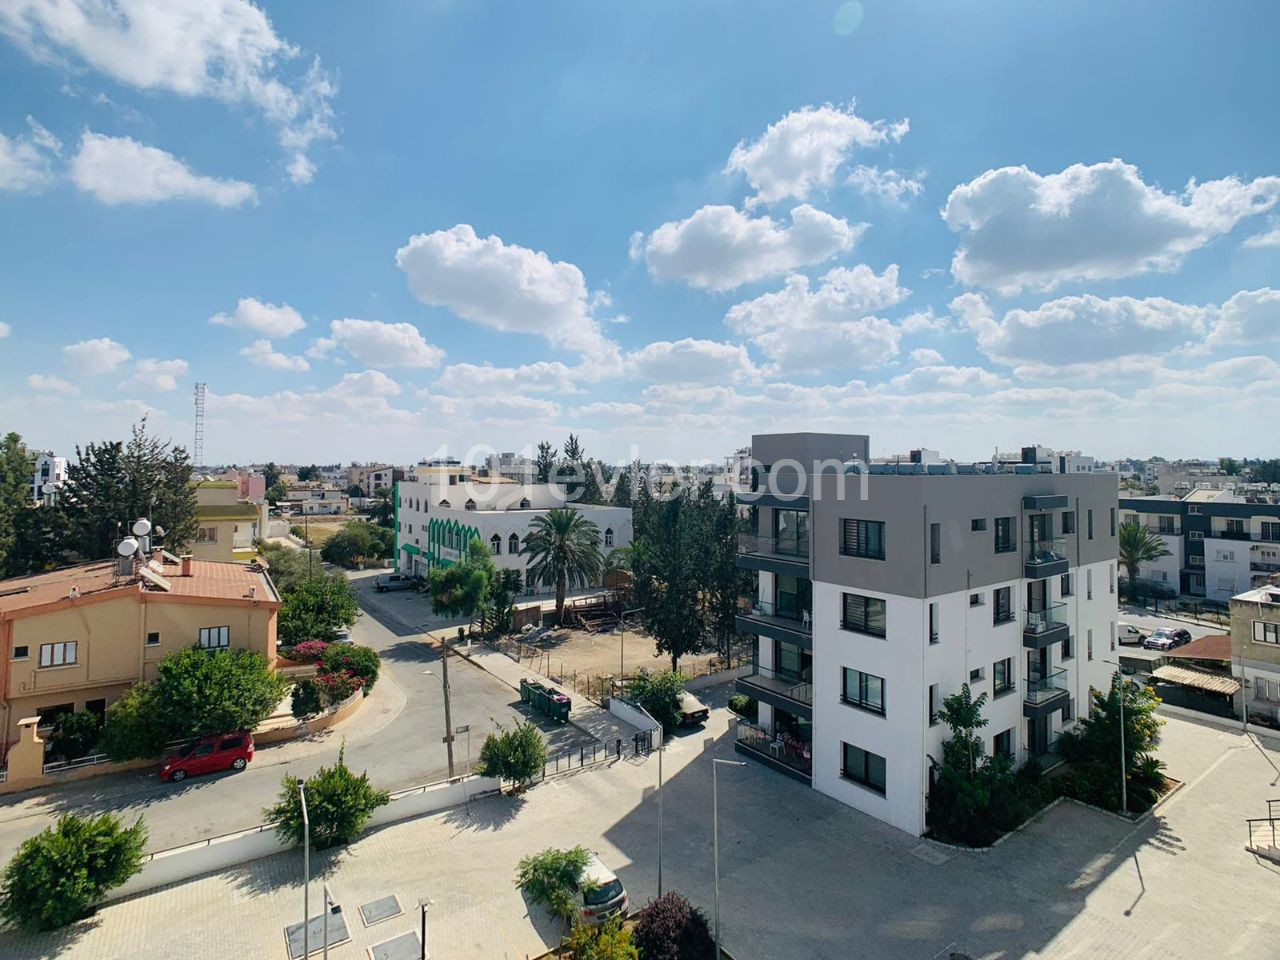 The Largest LUXURY 2 + 1 Double W.C. & Bathroom Apartment in Nicosia's Most Successful Site Management is Waiting for its New Tenant!